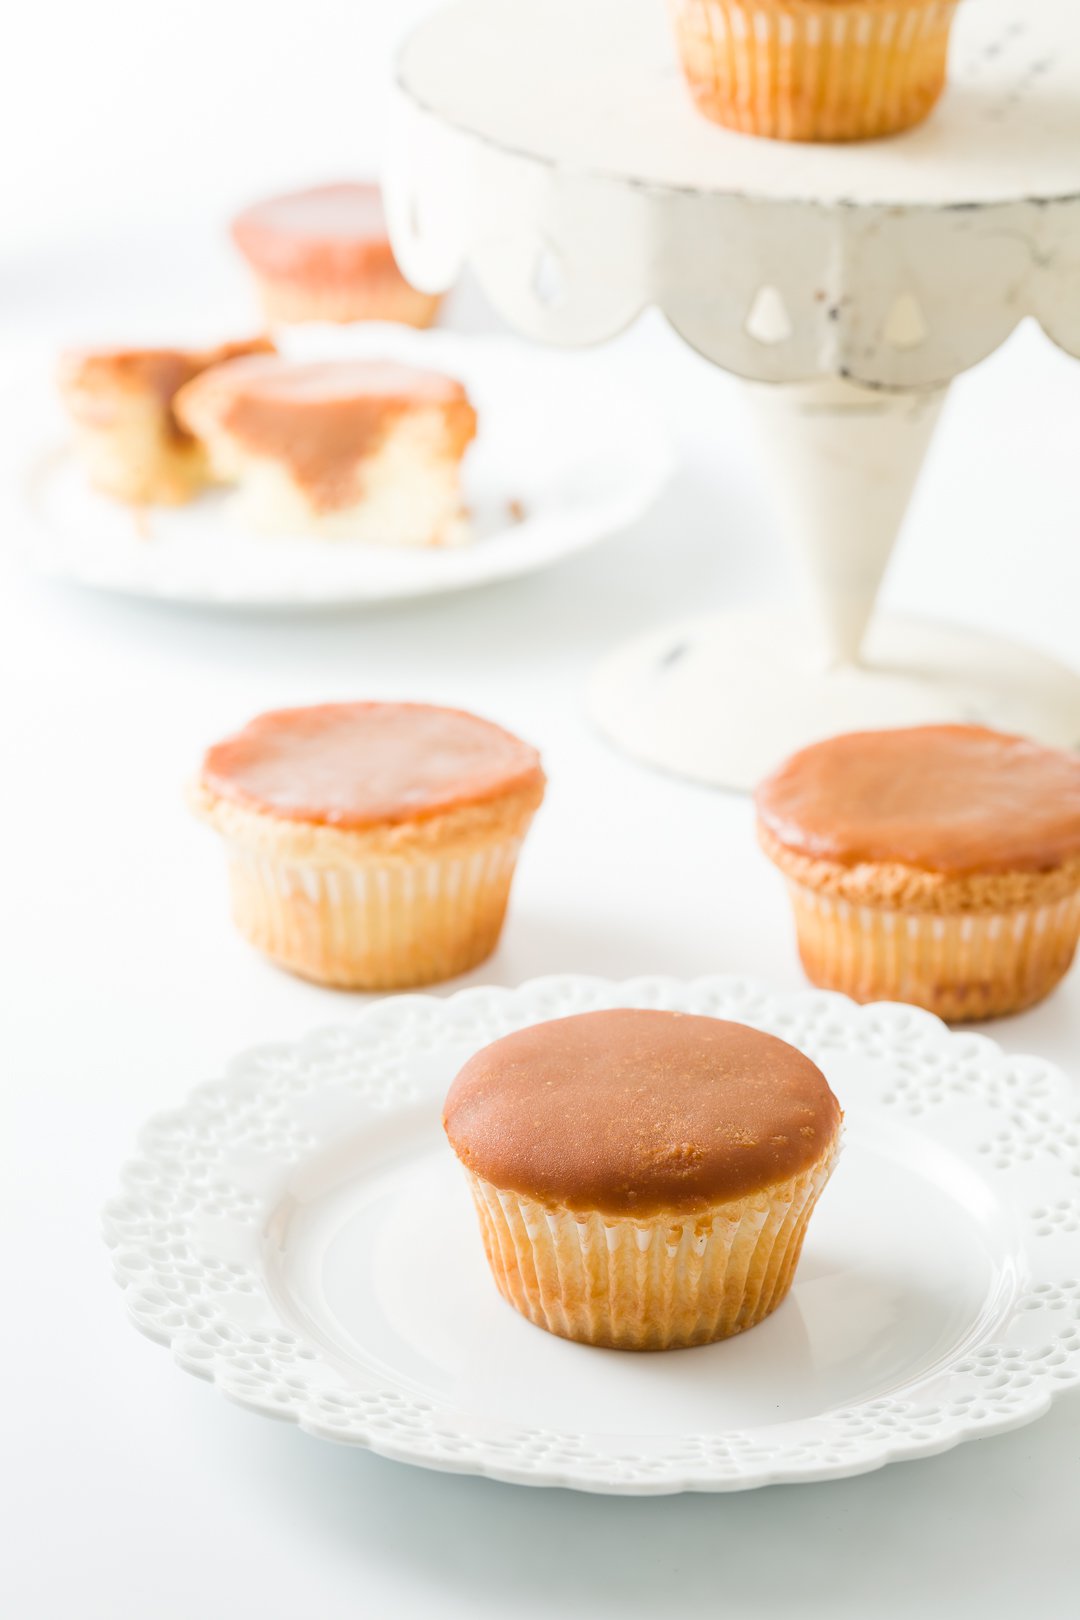 Cupcakes topped with caramel icing